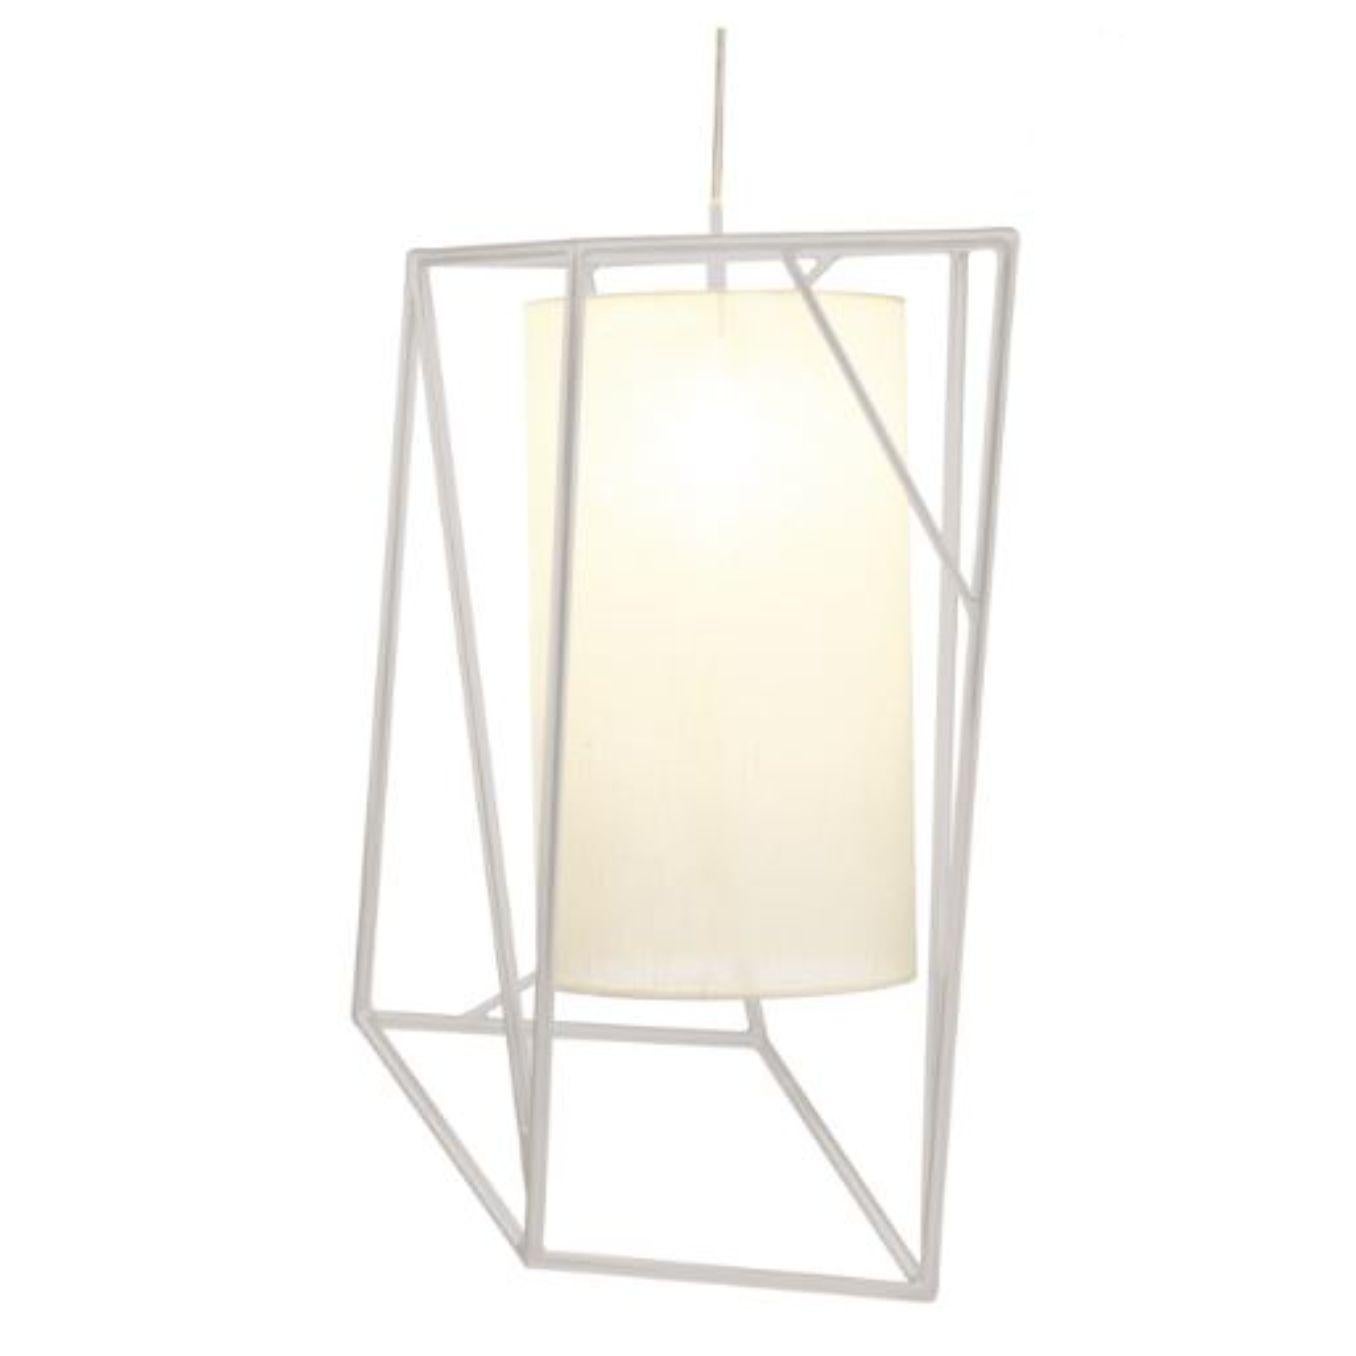 Taupe star II suspension lamp by Dooq
Dimensions: W 45 x D 45 x H 72 cm
Materials: lacquered metal, polished or satin metal.
Also available in different colors and materials.

Information:
230V/50Hz
E27/1x20W LED
120V/60Hz
E26/1x15W